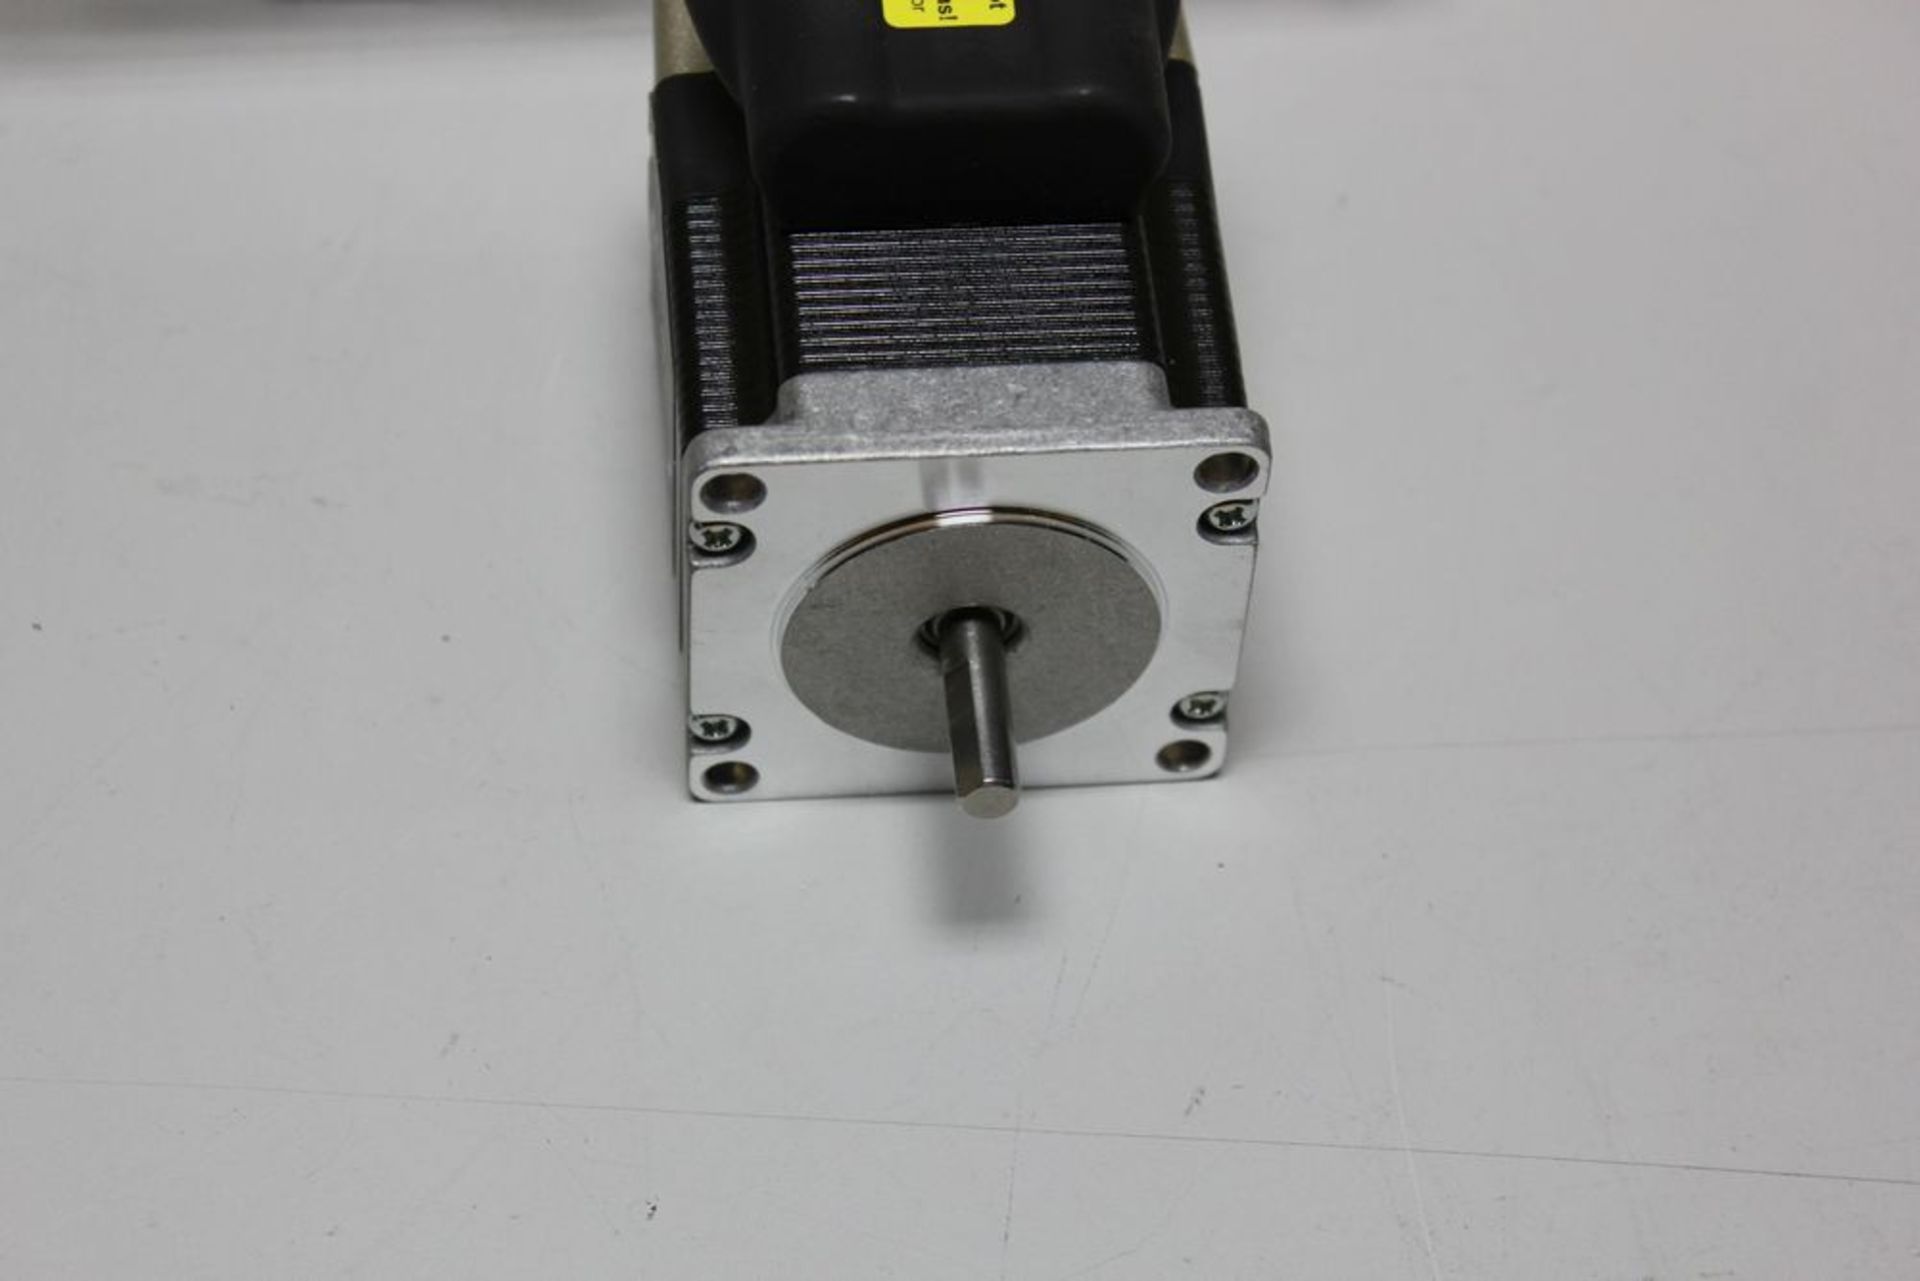 NEW SCHNEIDER MDRIVE 23 PLUS STEPPER MOTOR & DRIVE - Image 3 of 5